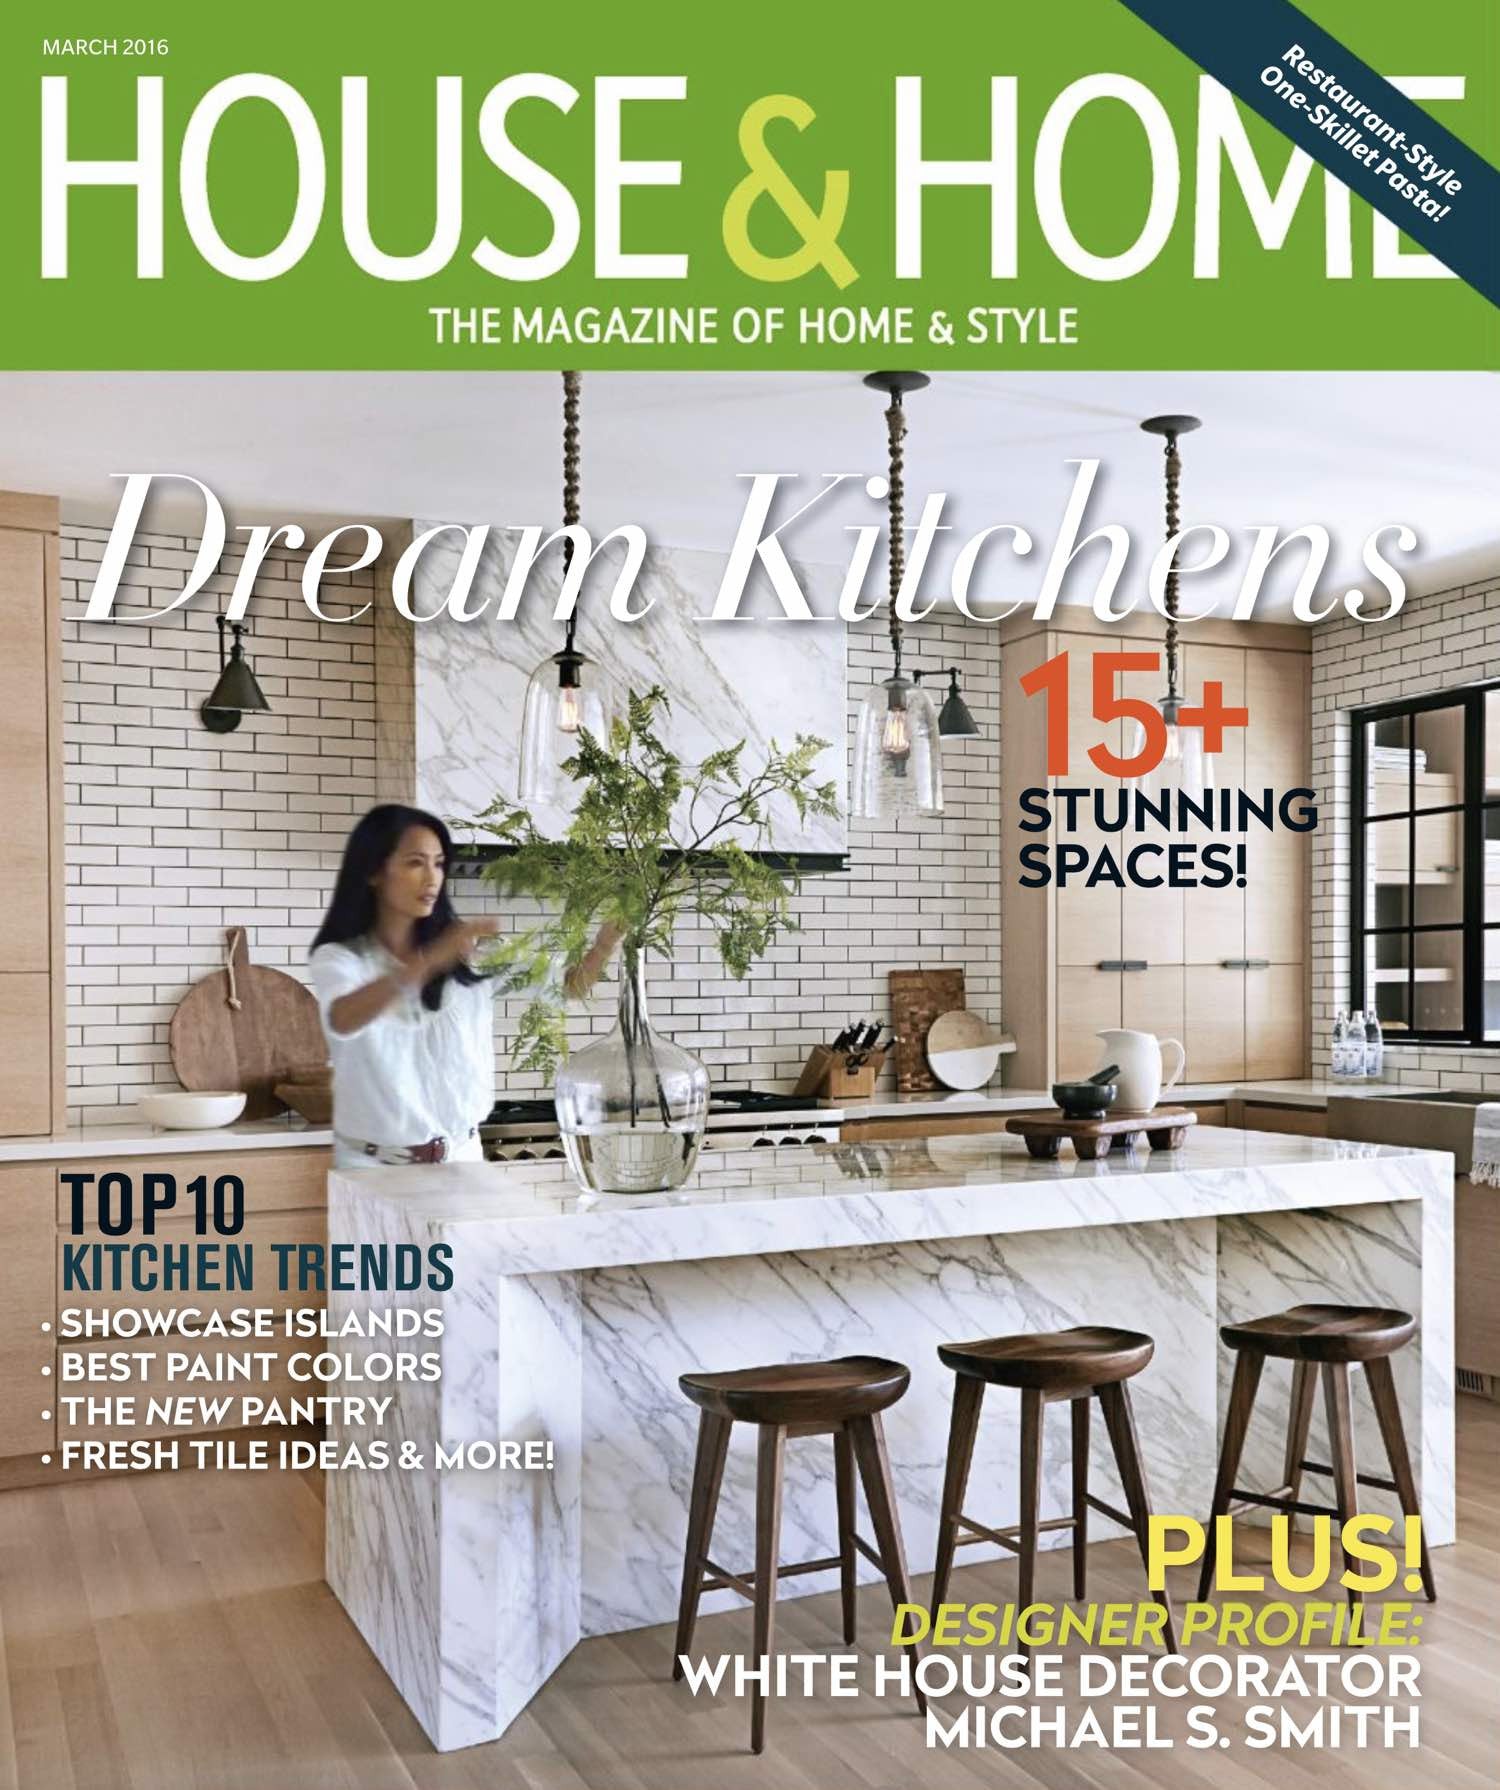 House & Home: March 2016